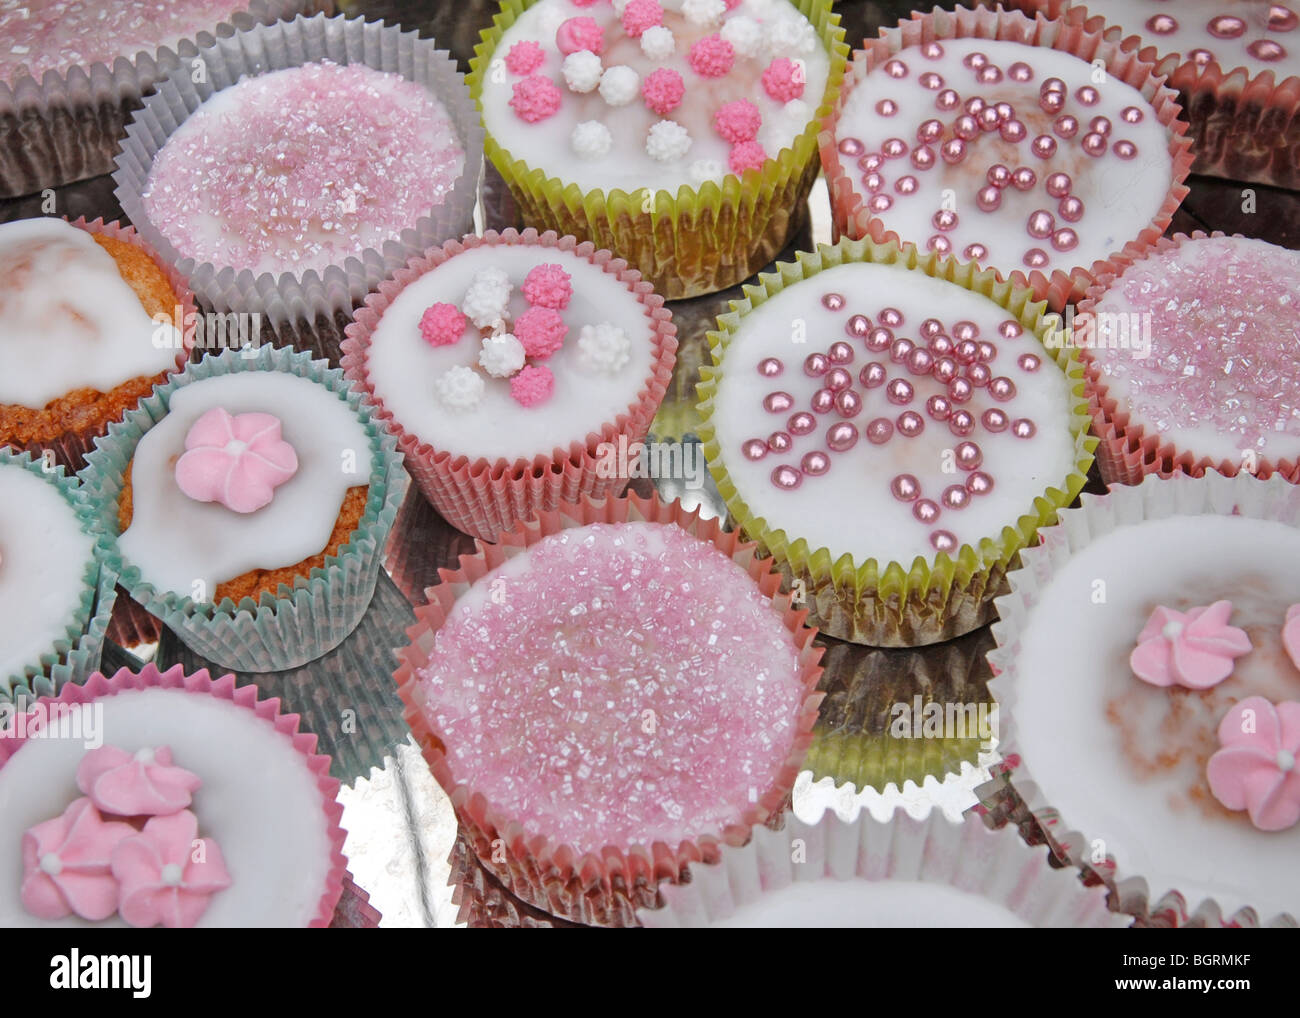 A selection of decorated cup cakes on a silver background Stock Photo